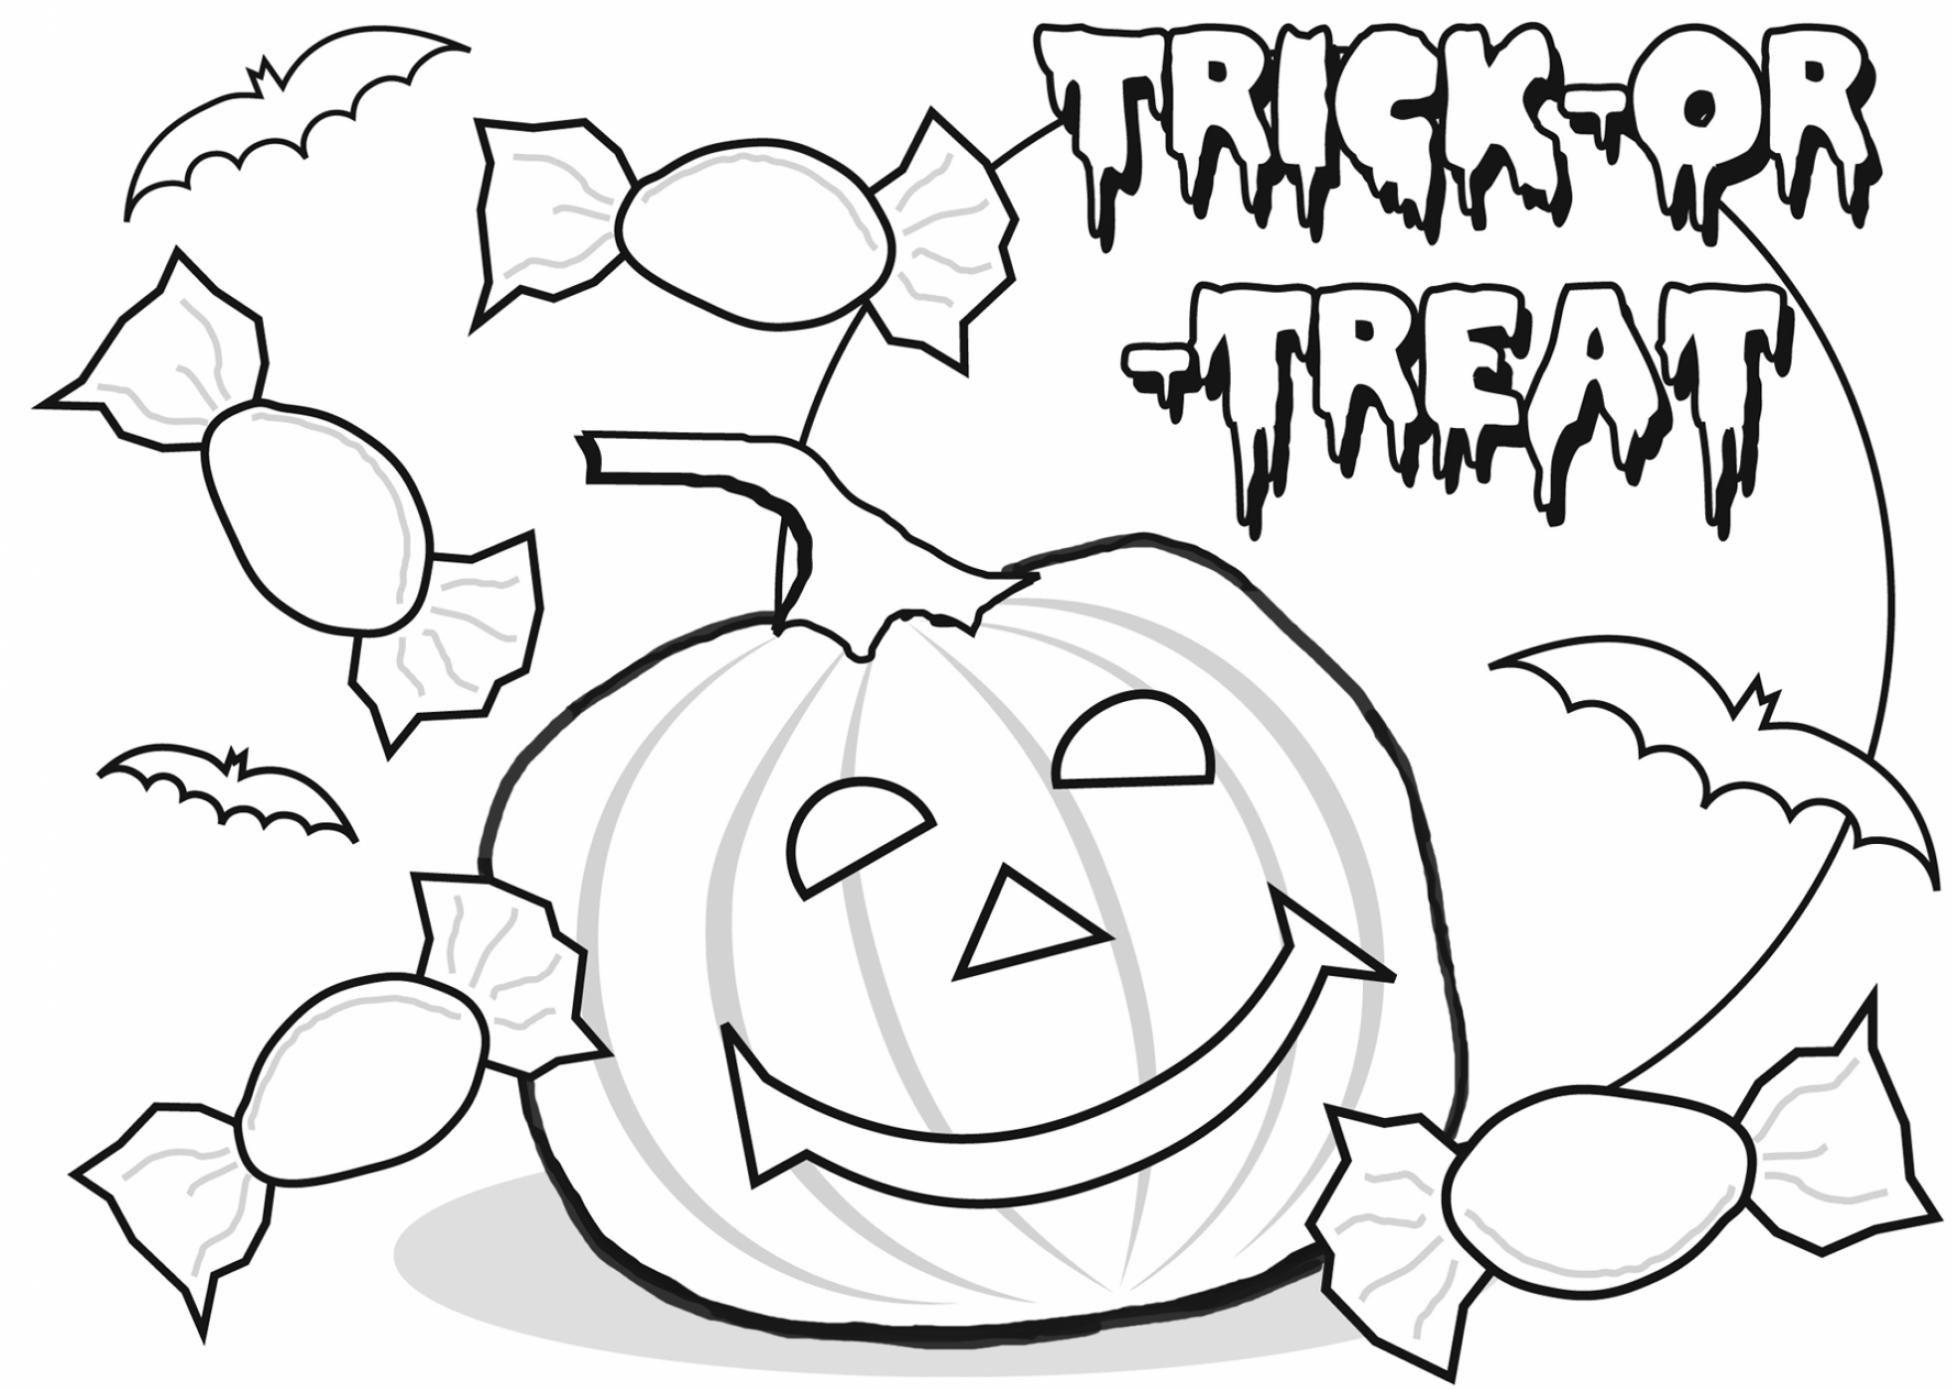 october-coloring-pages-best-coloring-pages-for-kids